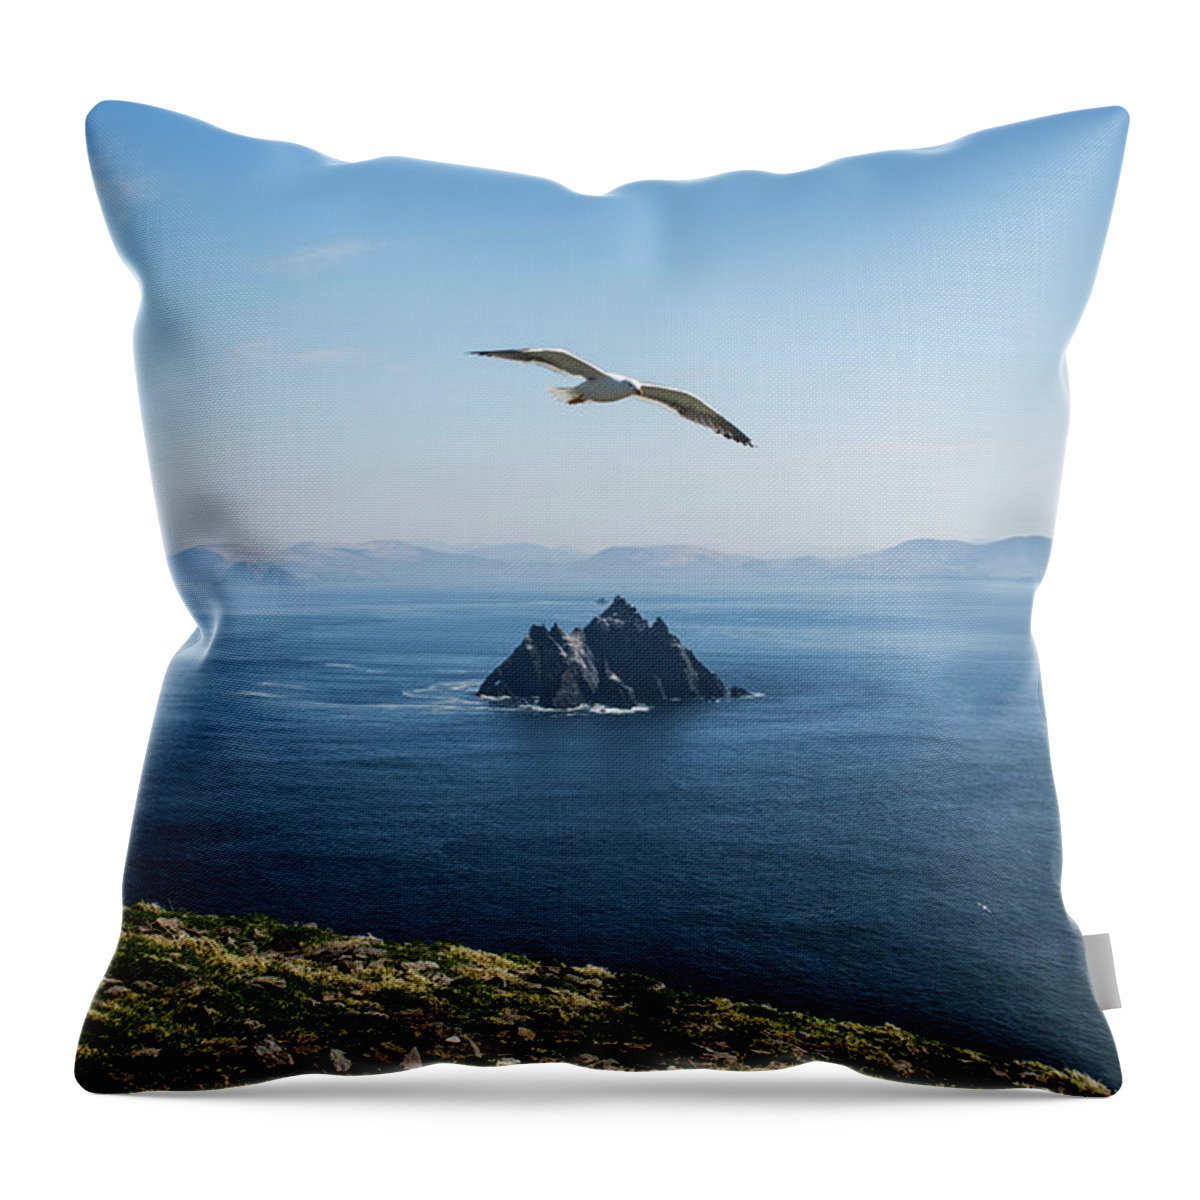 Unesco Throw Pillow featuring the photograph View Of Little Skellig From Skellig by James Sparshatt / Design Pics